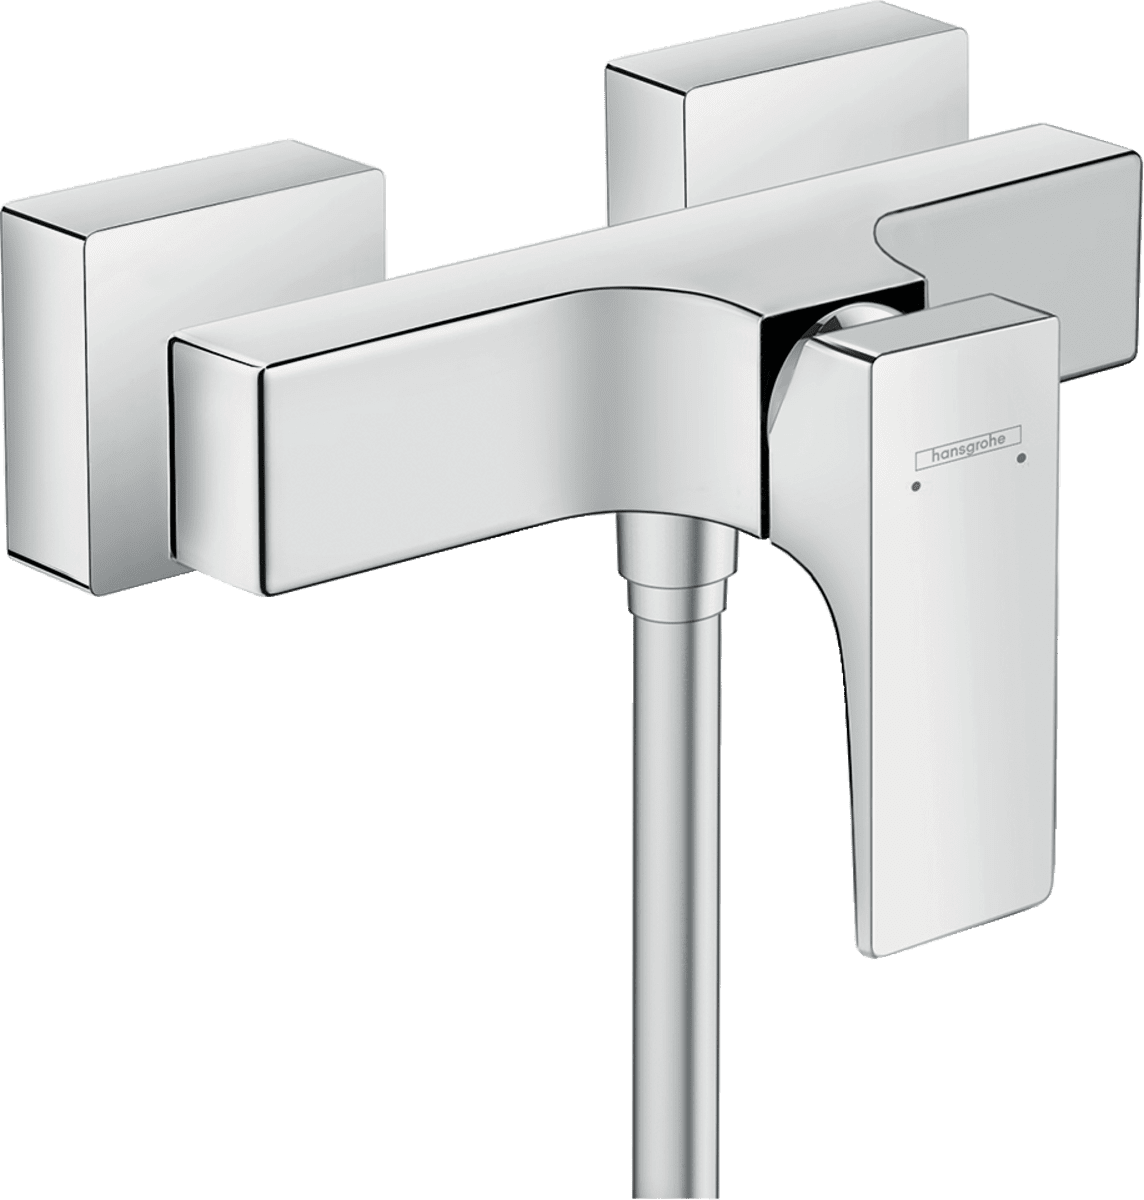 Picture of HANSGROHE Metropol Single lever shower mixer for exposed installation with lever handle #32560000 - Chrome